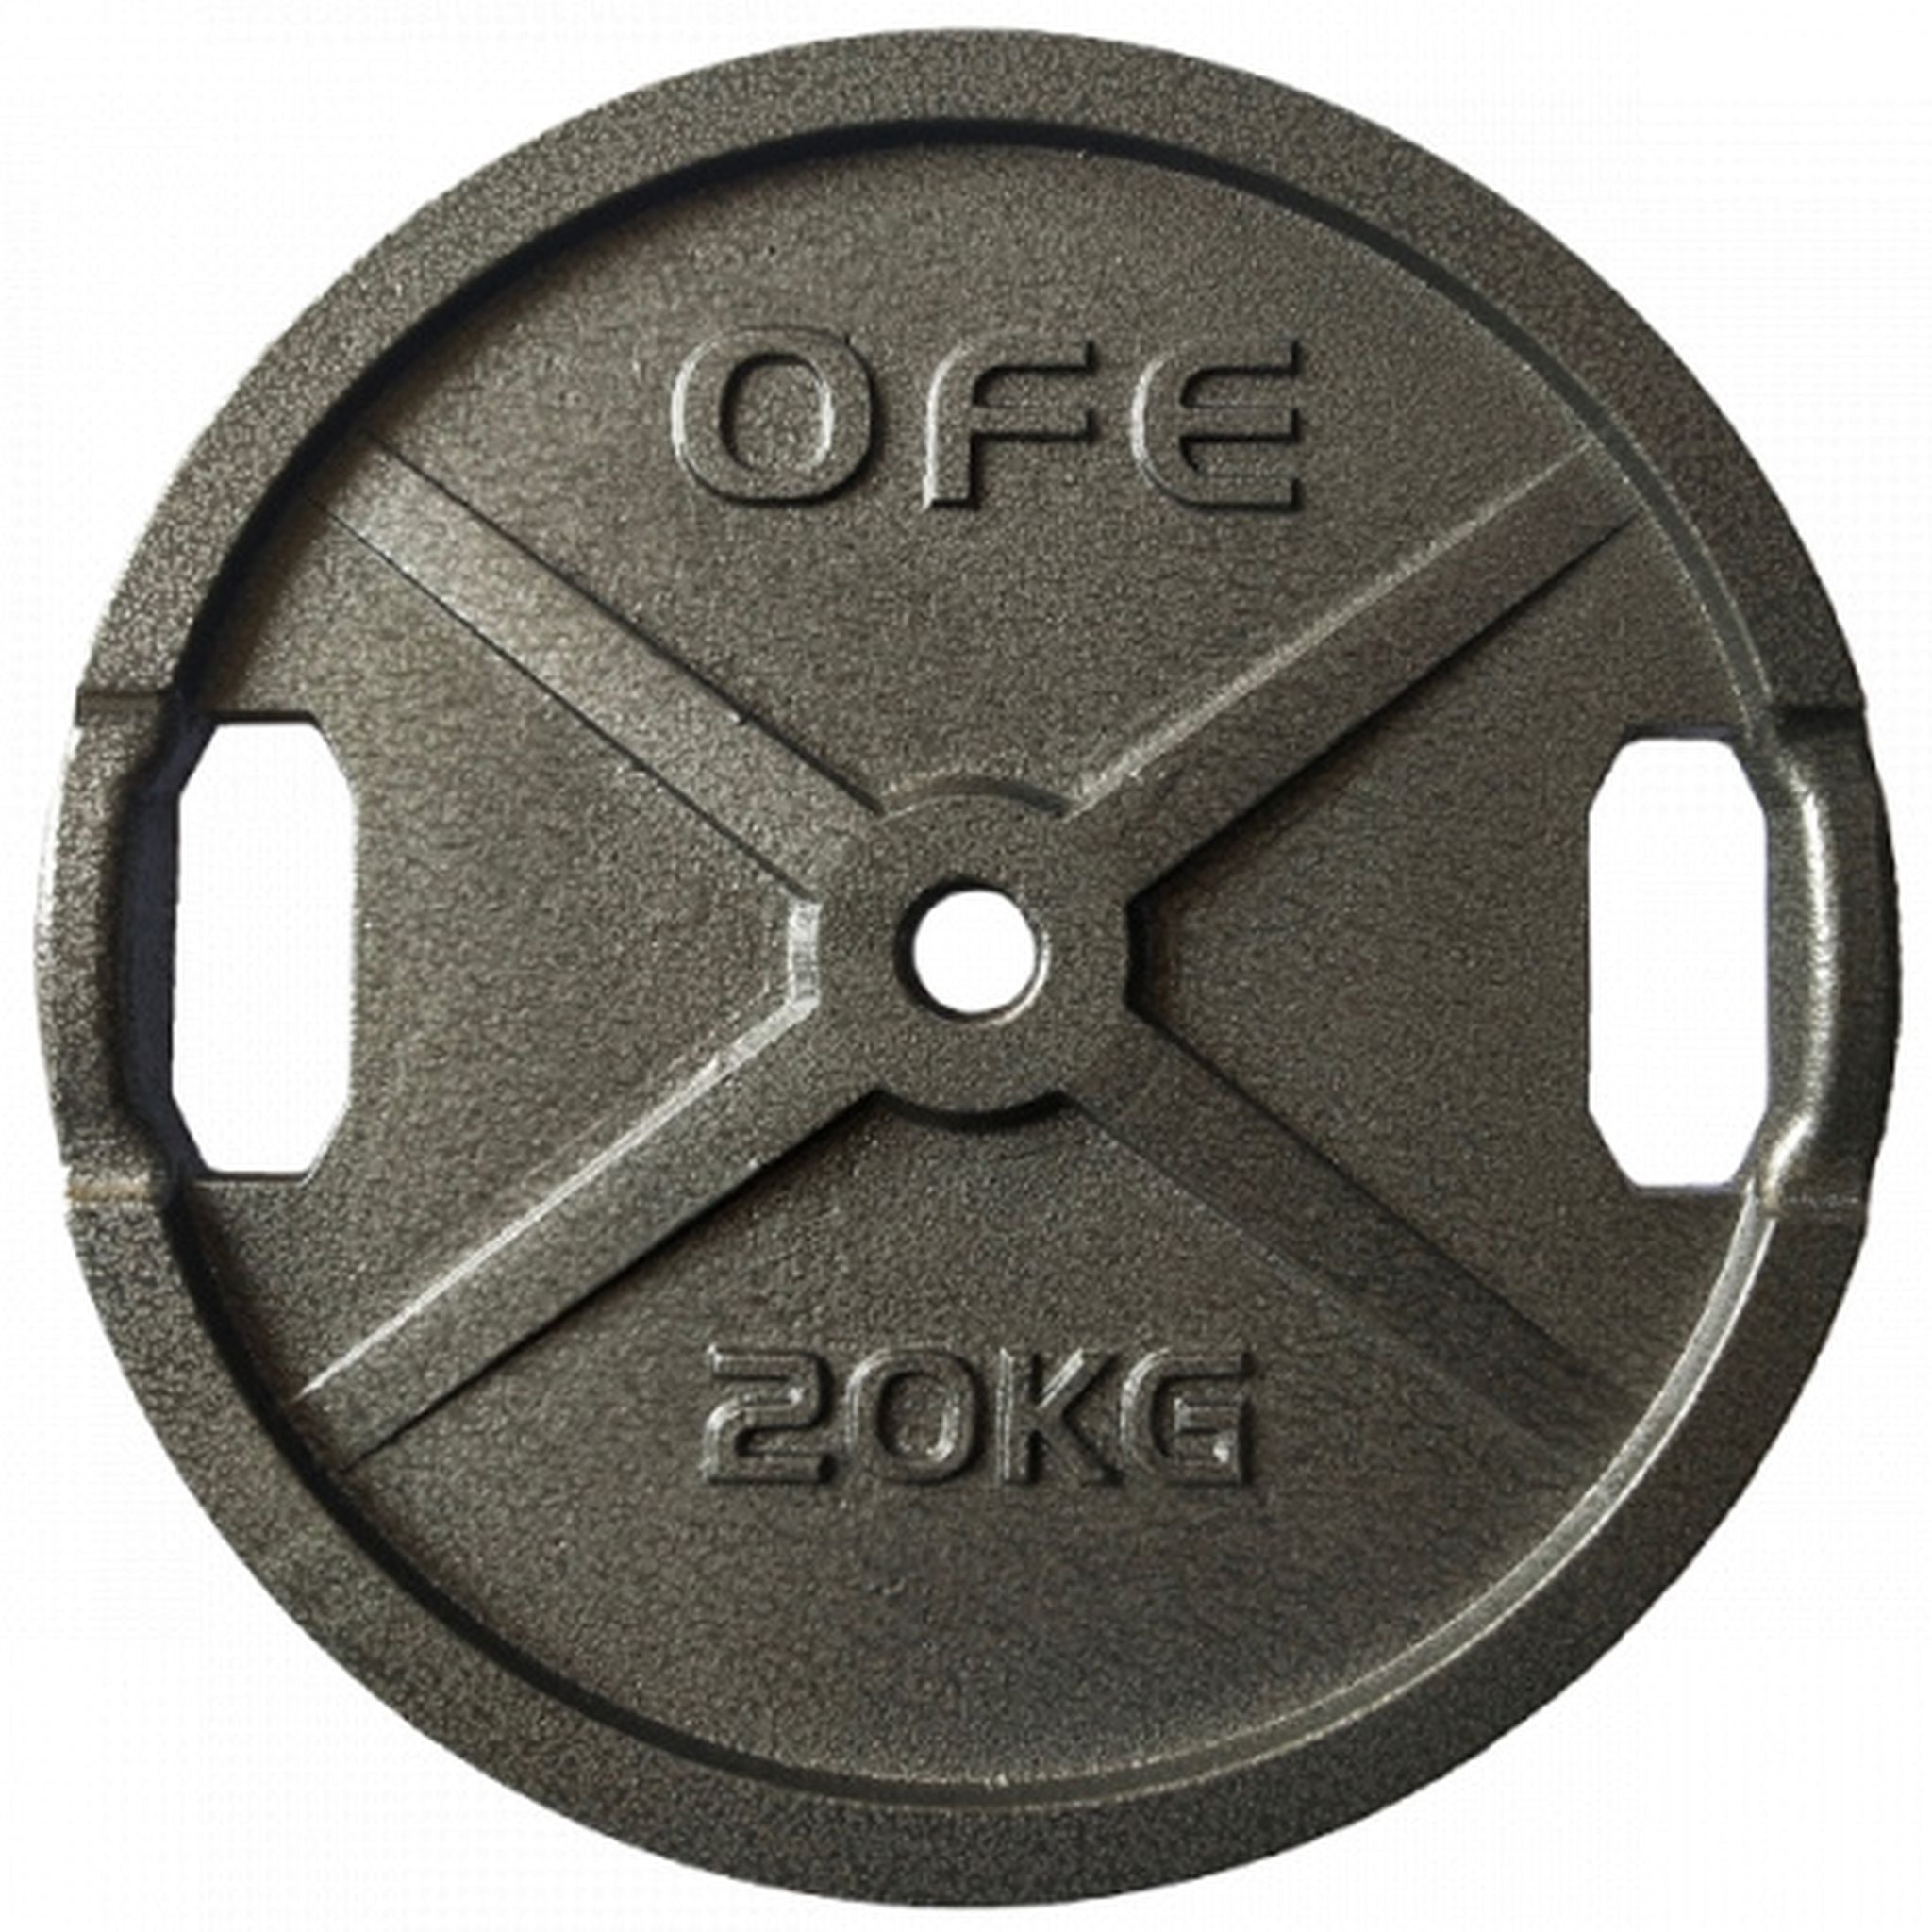 Olympic Fitness STD 20kg Weight Plate